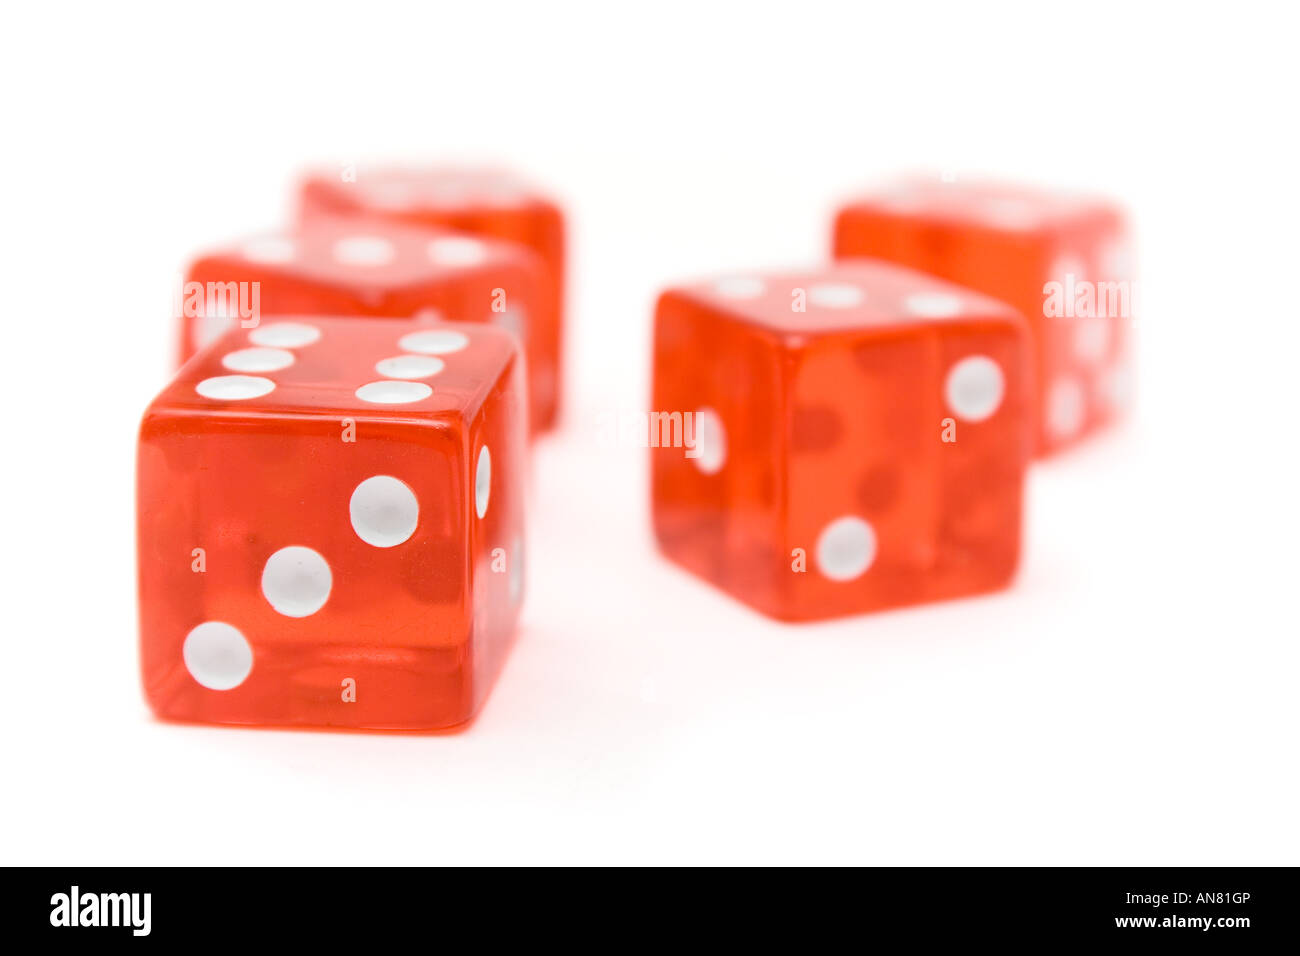 Translucent red dice isolated on a white background. Shallow depth of field. Stock Photo